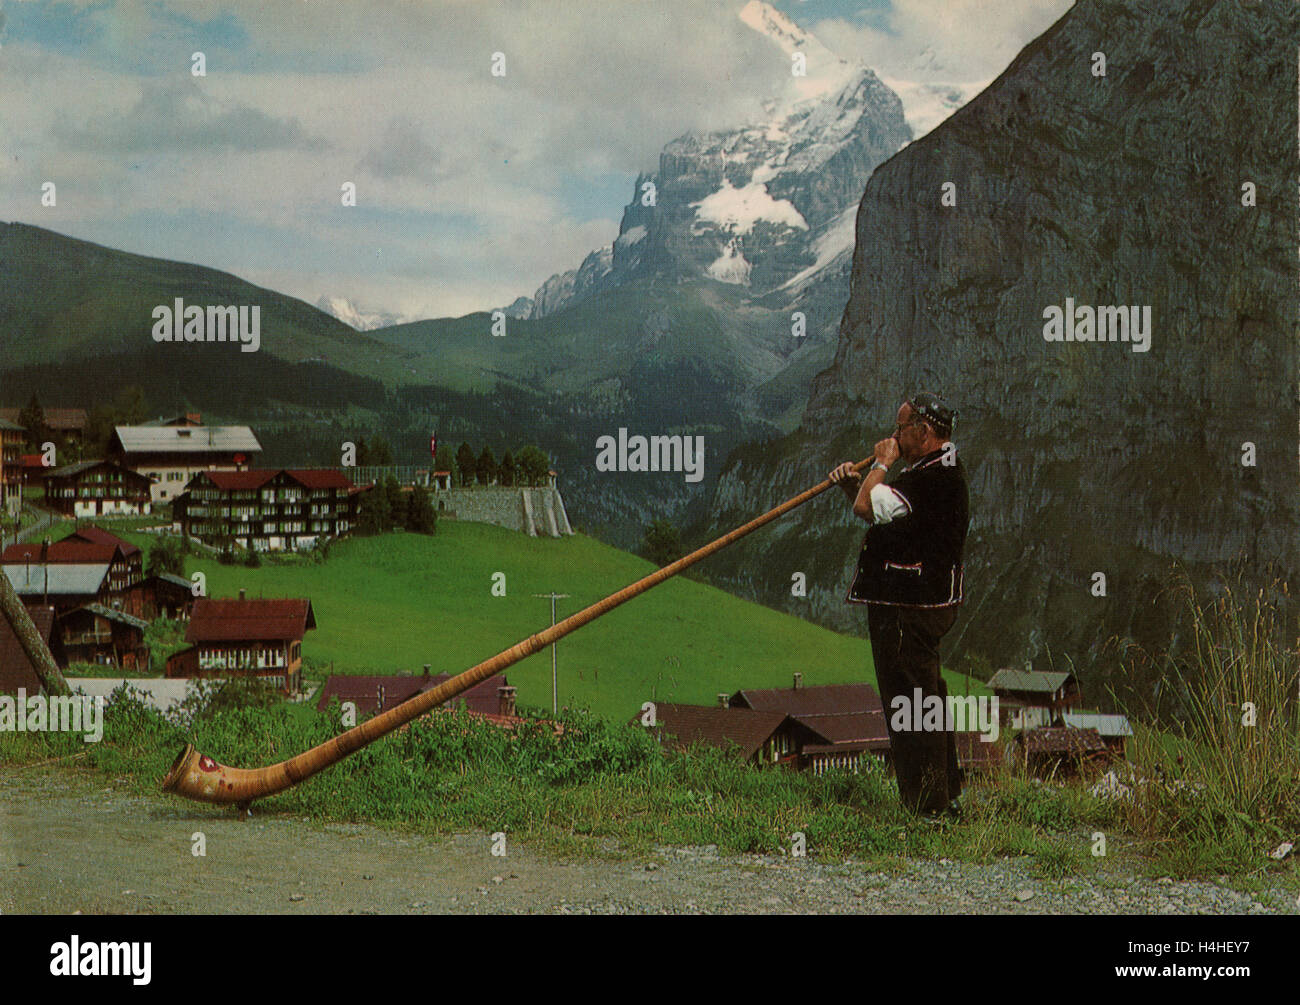 Vintage postcard of a man in traditional Swiss attire blowing an Alpine Horn or alphorn with a Swiss style mountain and rural backdrop circa 1960s. Stock Photo